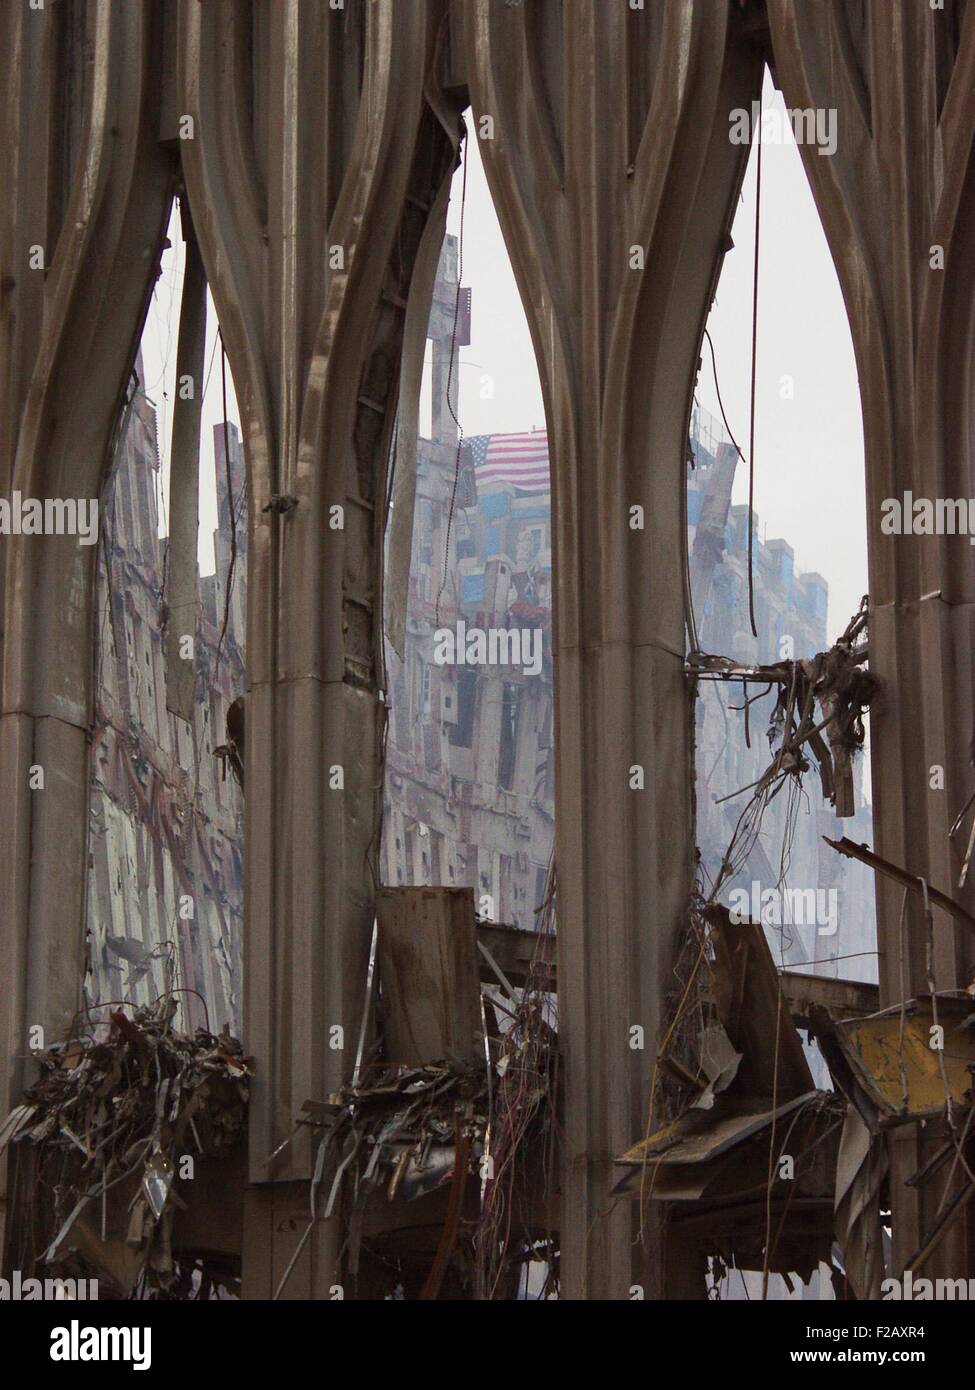 Fragment of the façade of WTC 1, the South Tower façade on Sept. 21, 2001. Through the center arch a flag can be seen on the damaged New York Telephone (now Verizon) Building. World Trade Center, New York City, after September 11, 2001 terrorist attacks. (BSLOC 2015 2 102) Stock Photo